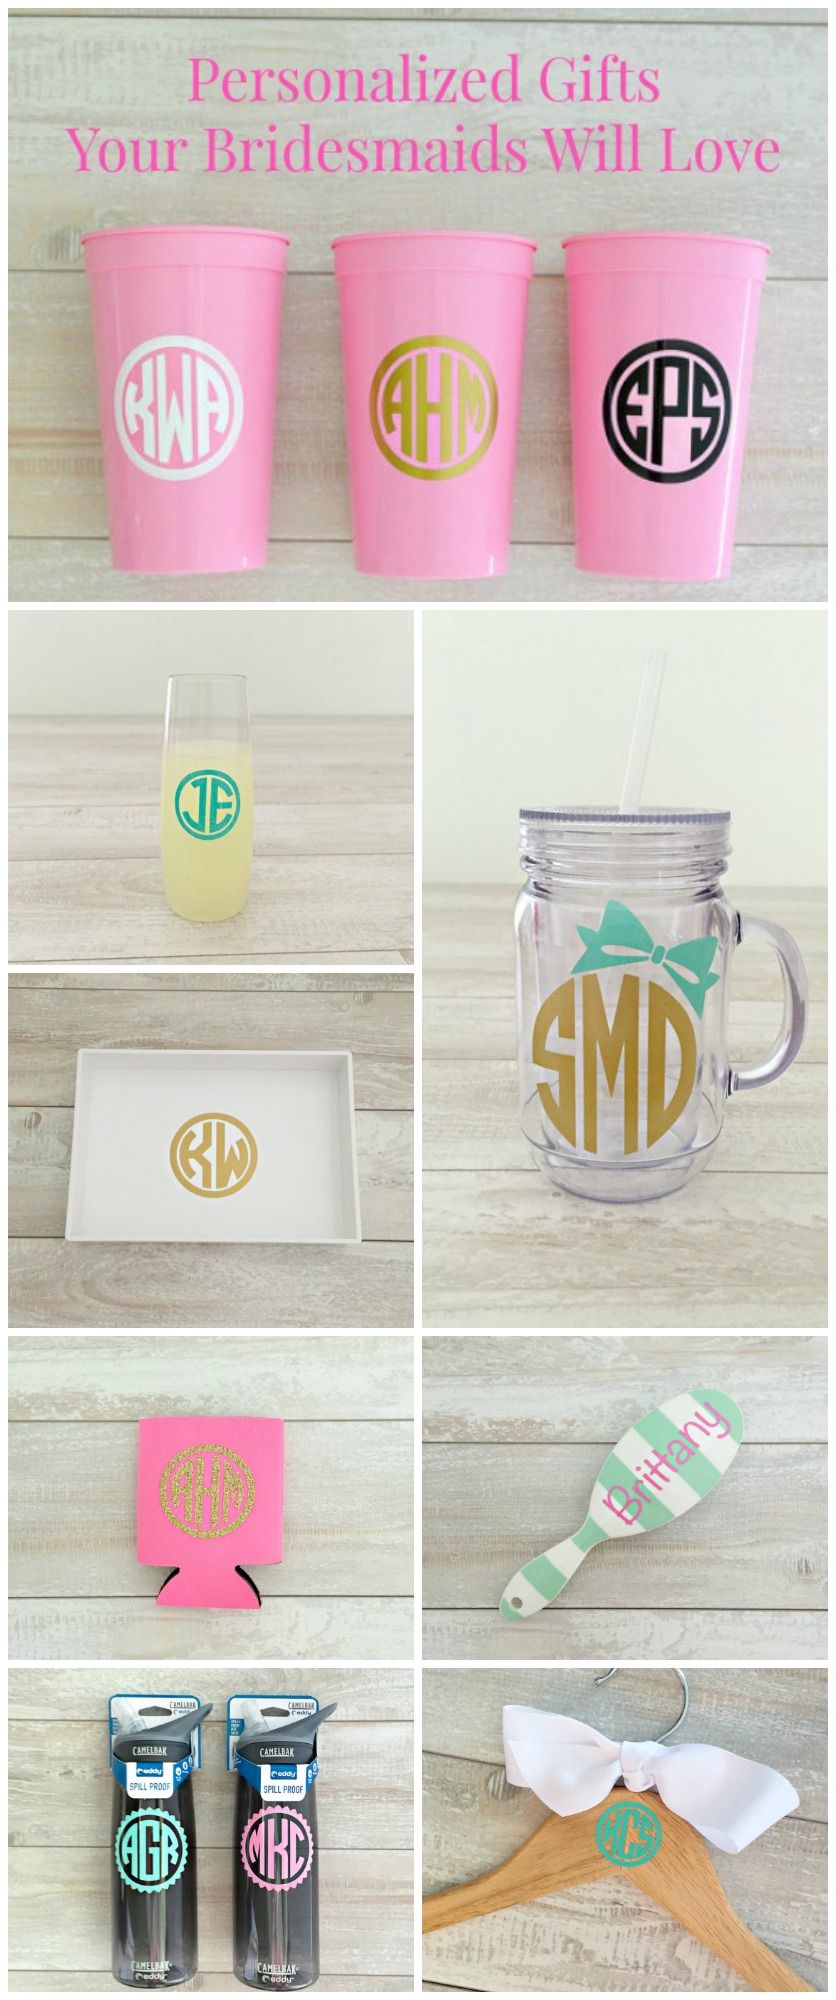 Great Personalized Bridesmaid Gifts -   Great Personalized Bridesmaid Gifts